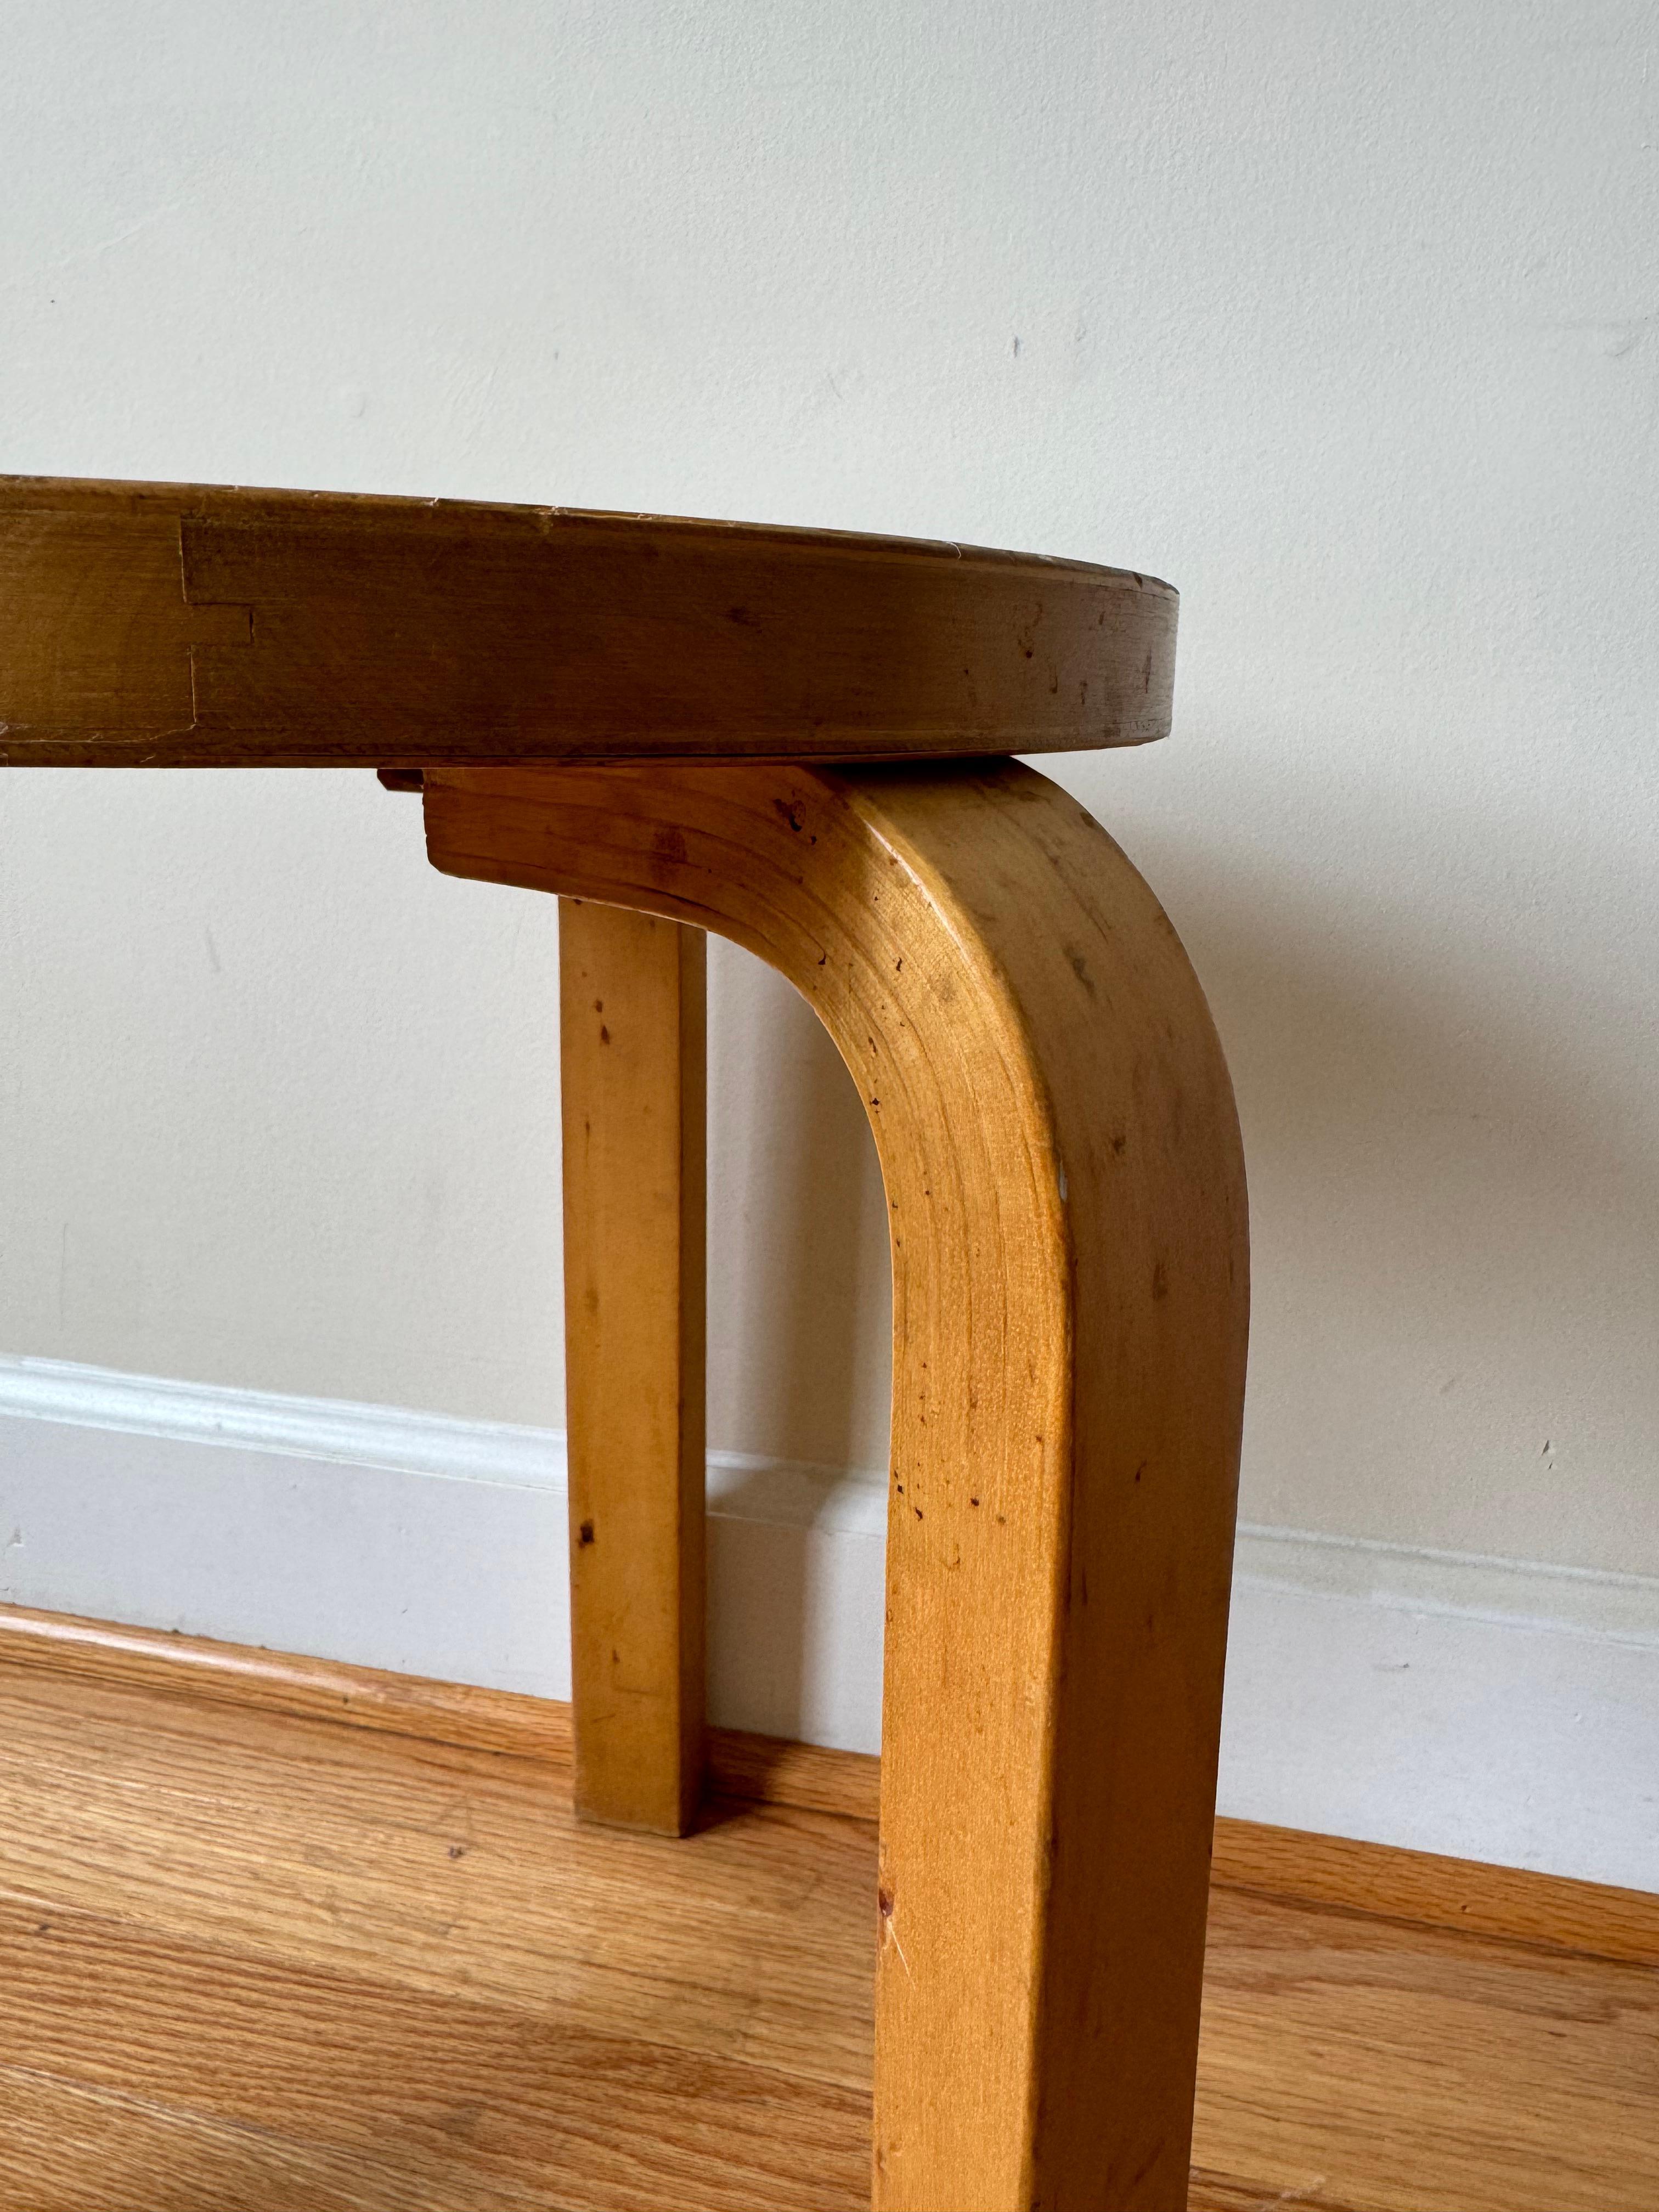 Bentwood Stool 60 with finger joint seat by Alvar Aalto for Artek, 1960s For Sale